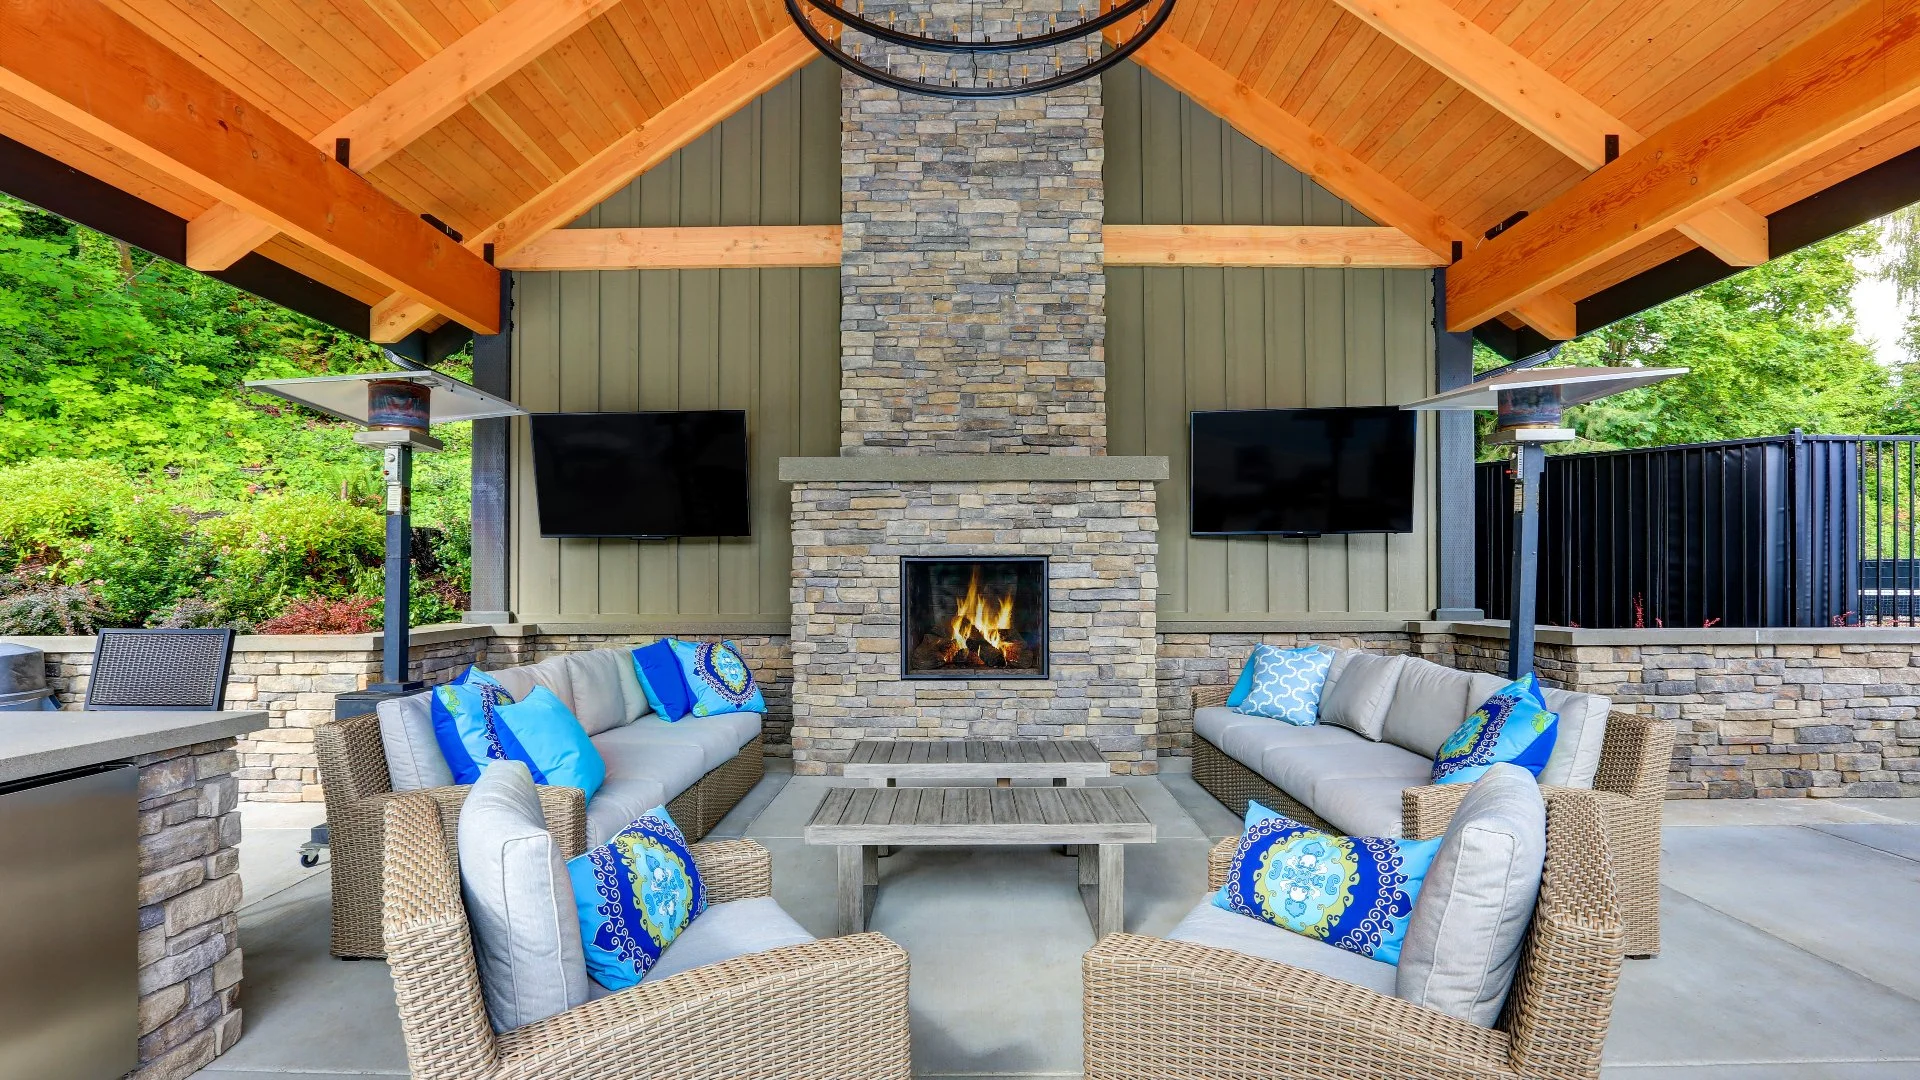 How Much Does It Cost to Have an Outdoor Fireplace Installed?